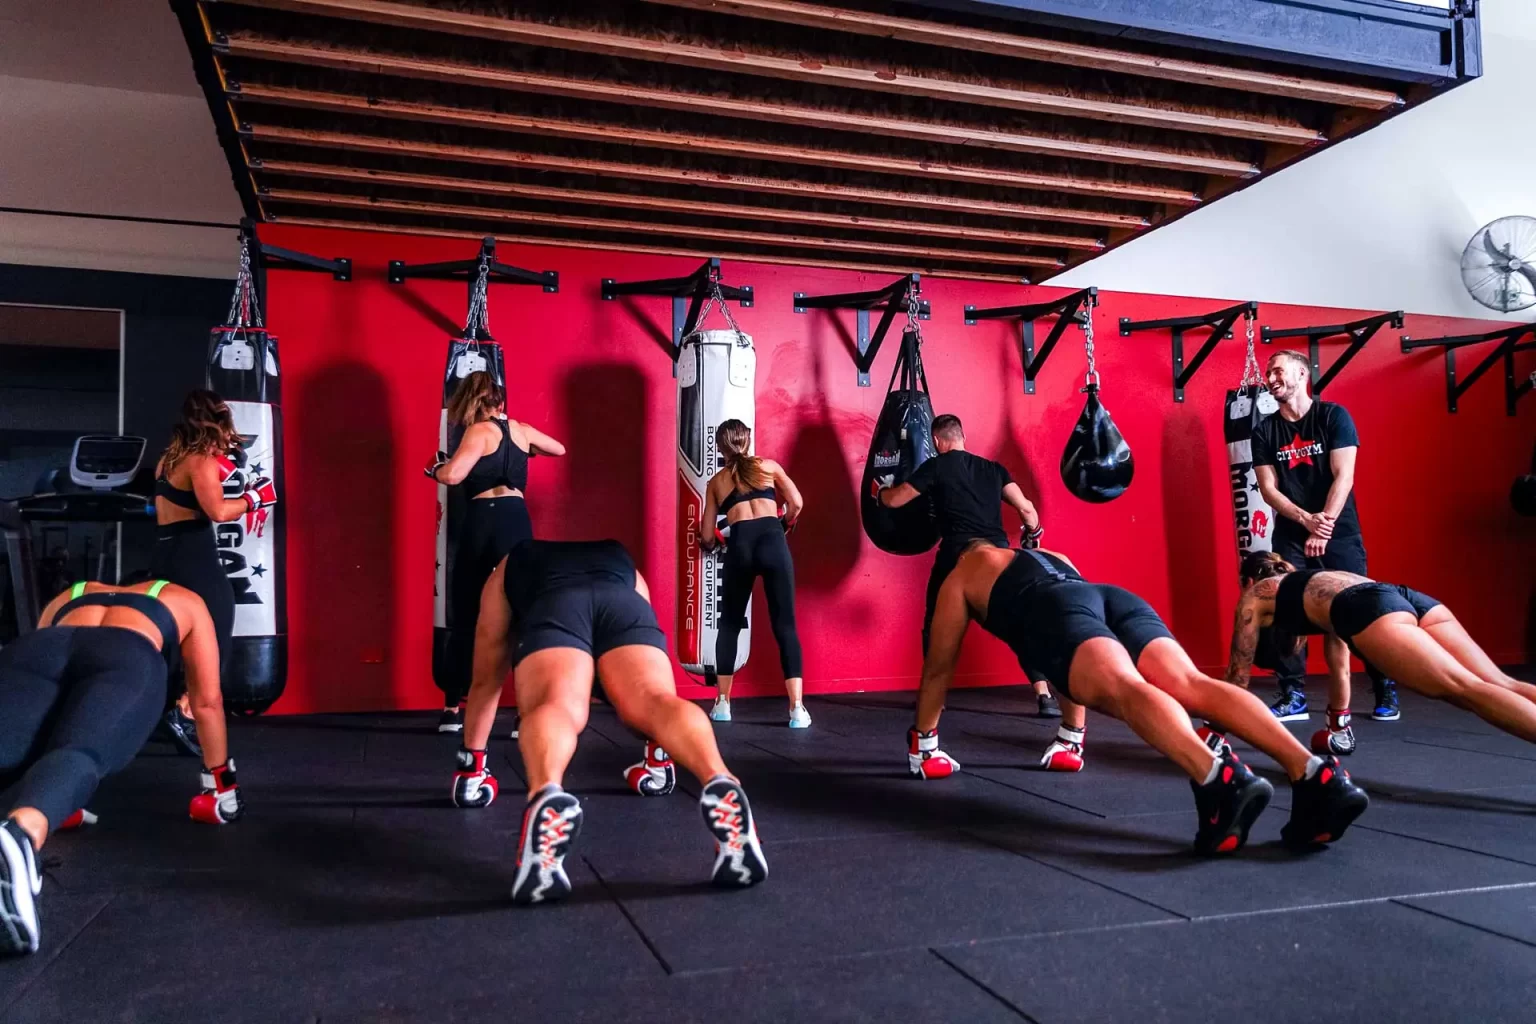 People in a gym performing various exercises, including push-ups and bag punching, with a trainer observing. Red wall with hanging bags in the background.